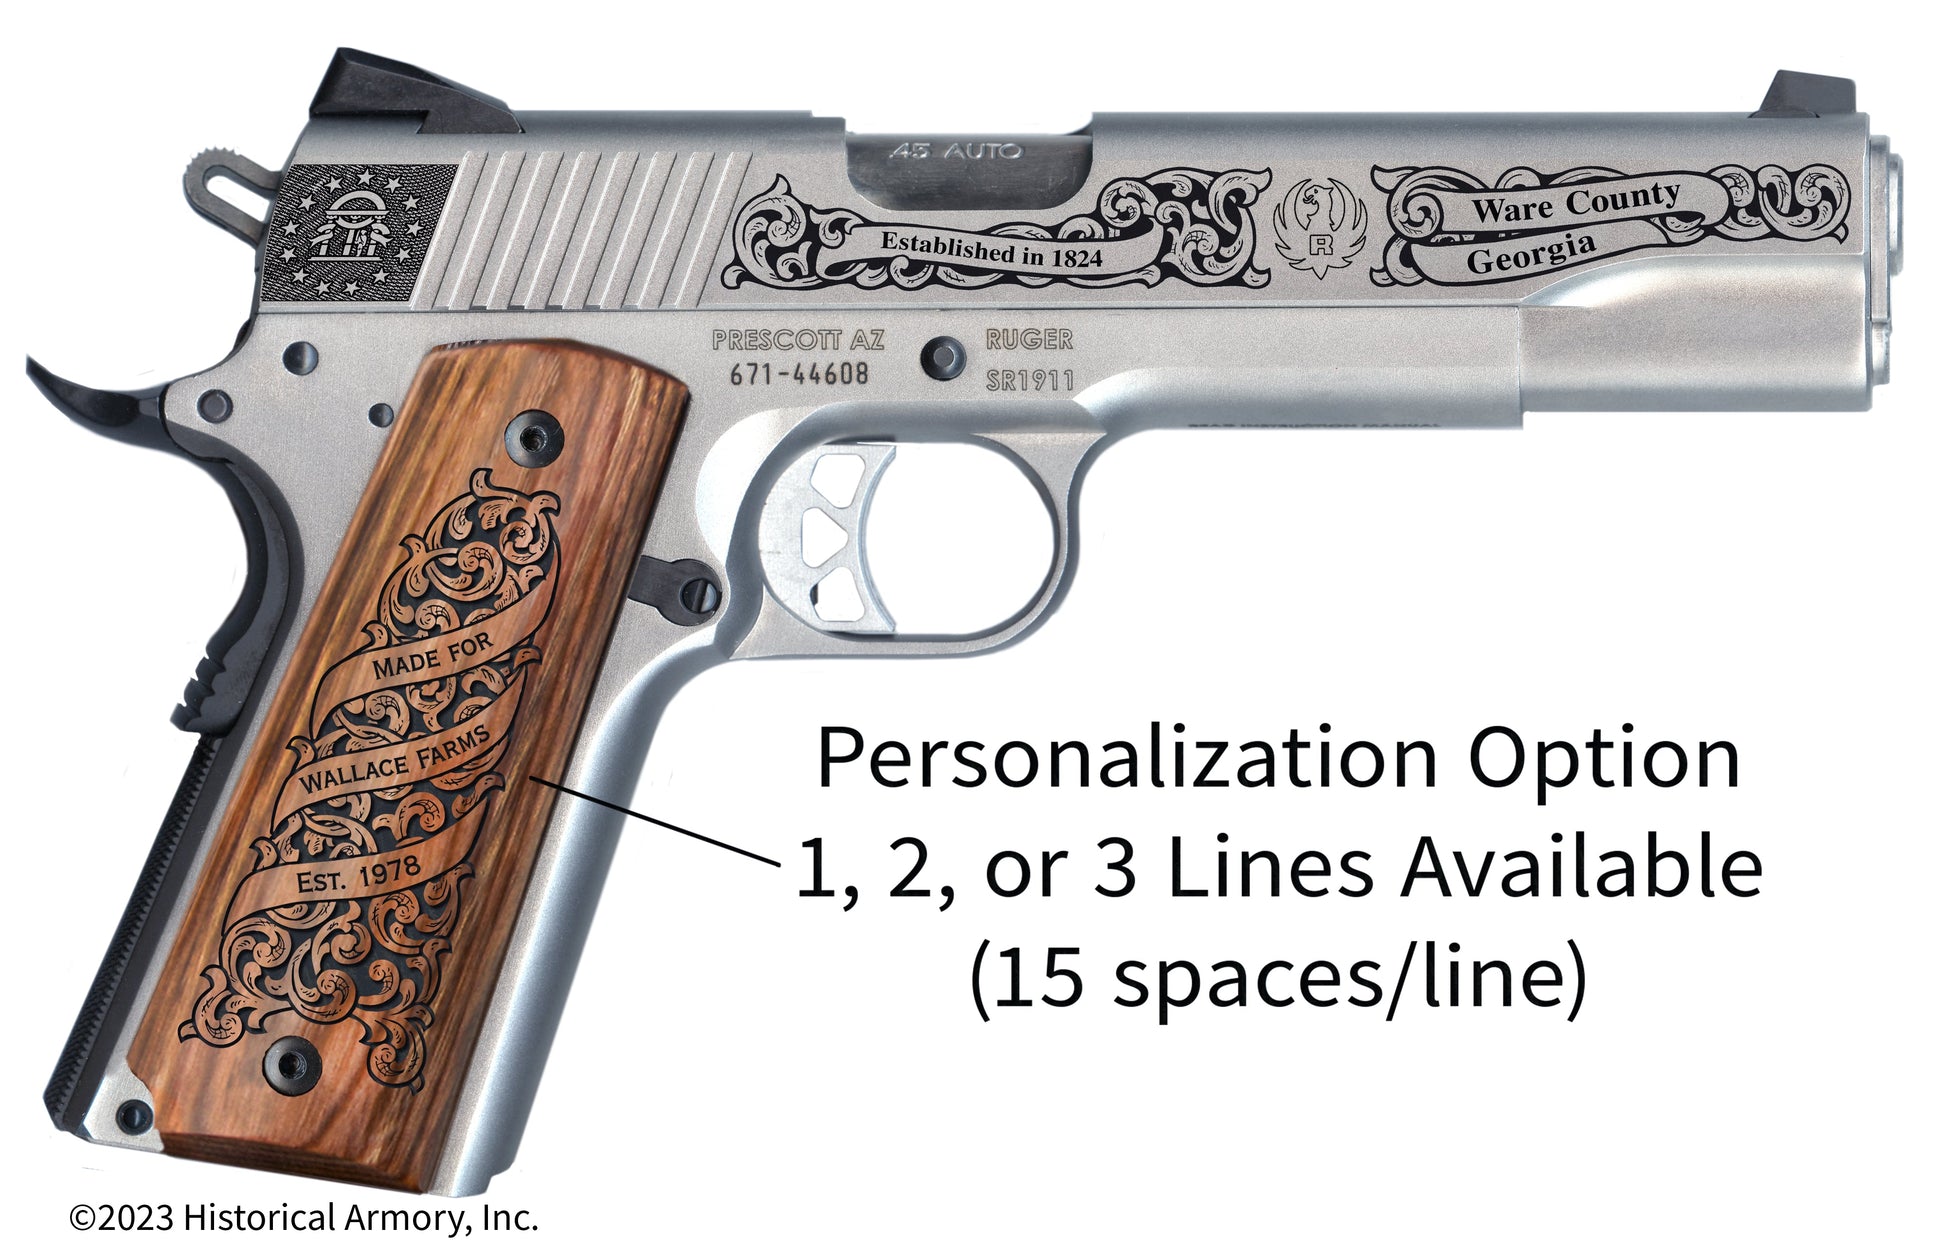 Ware County Georgia Personalized Engraved .45 Auto Ruger 1911